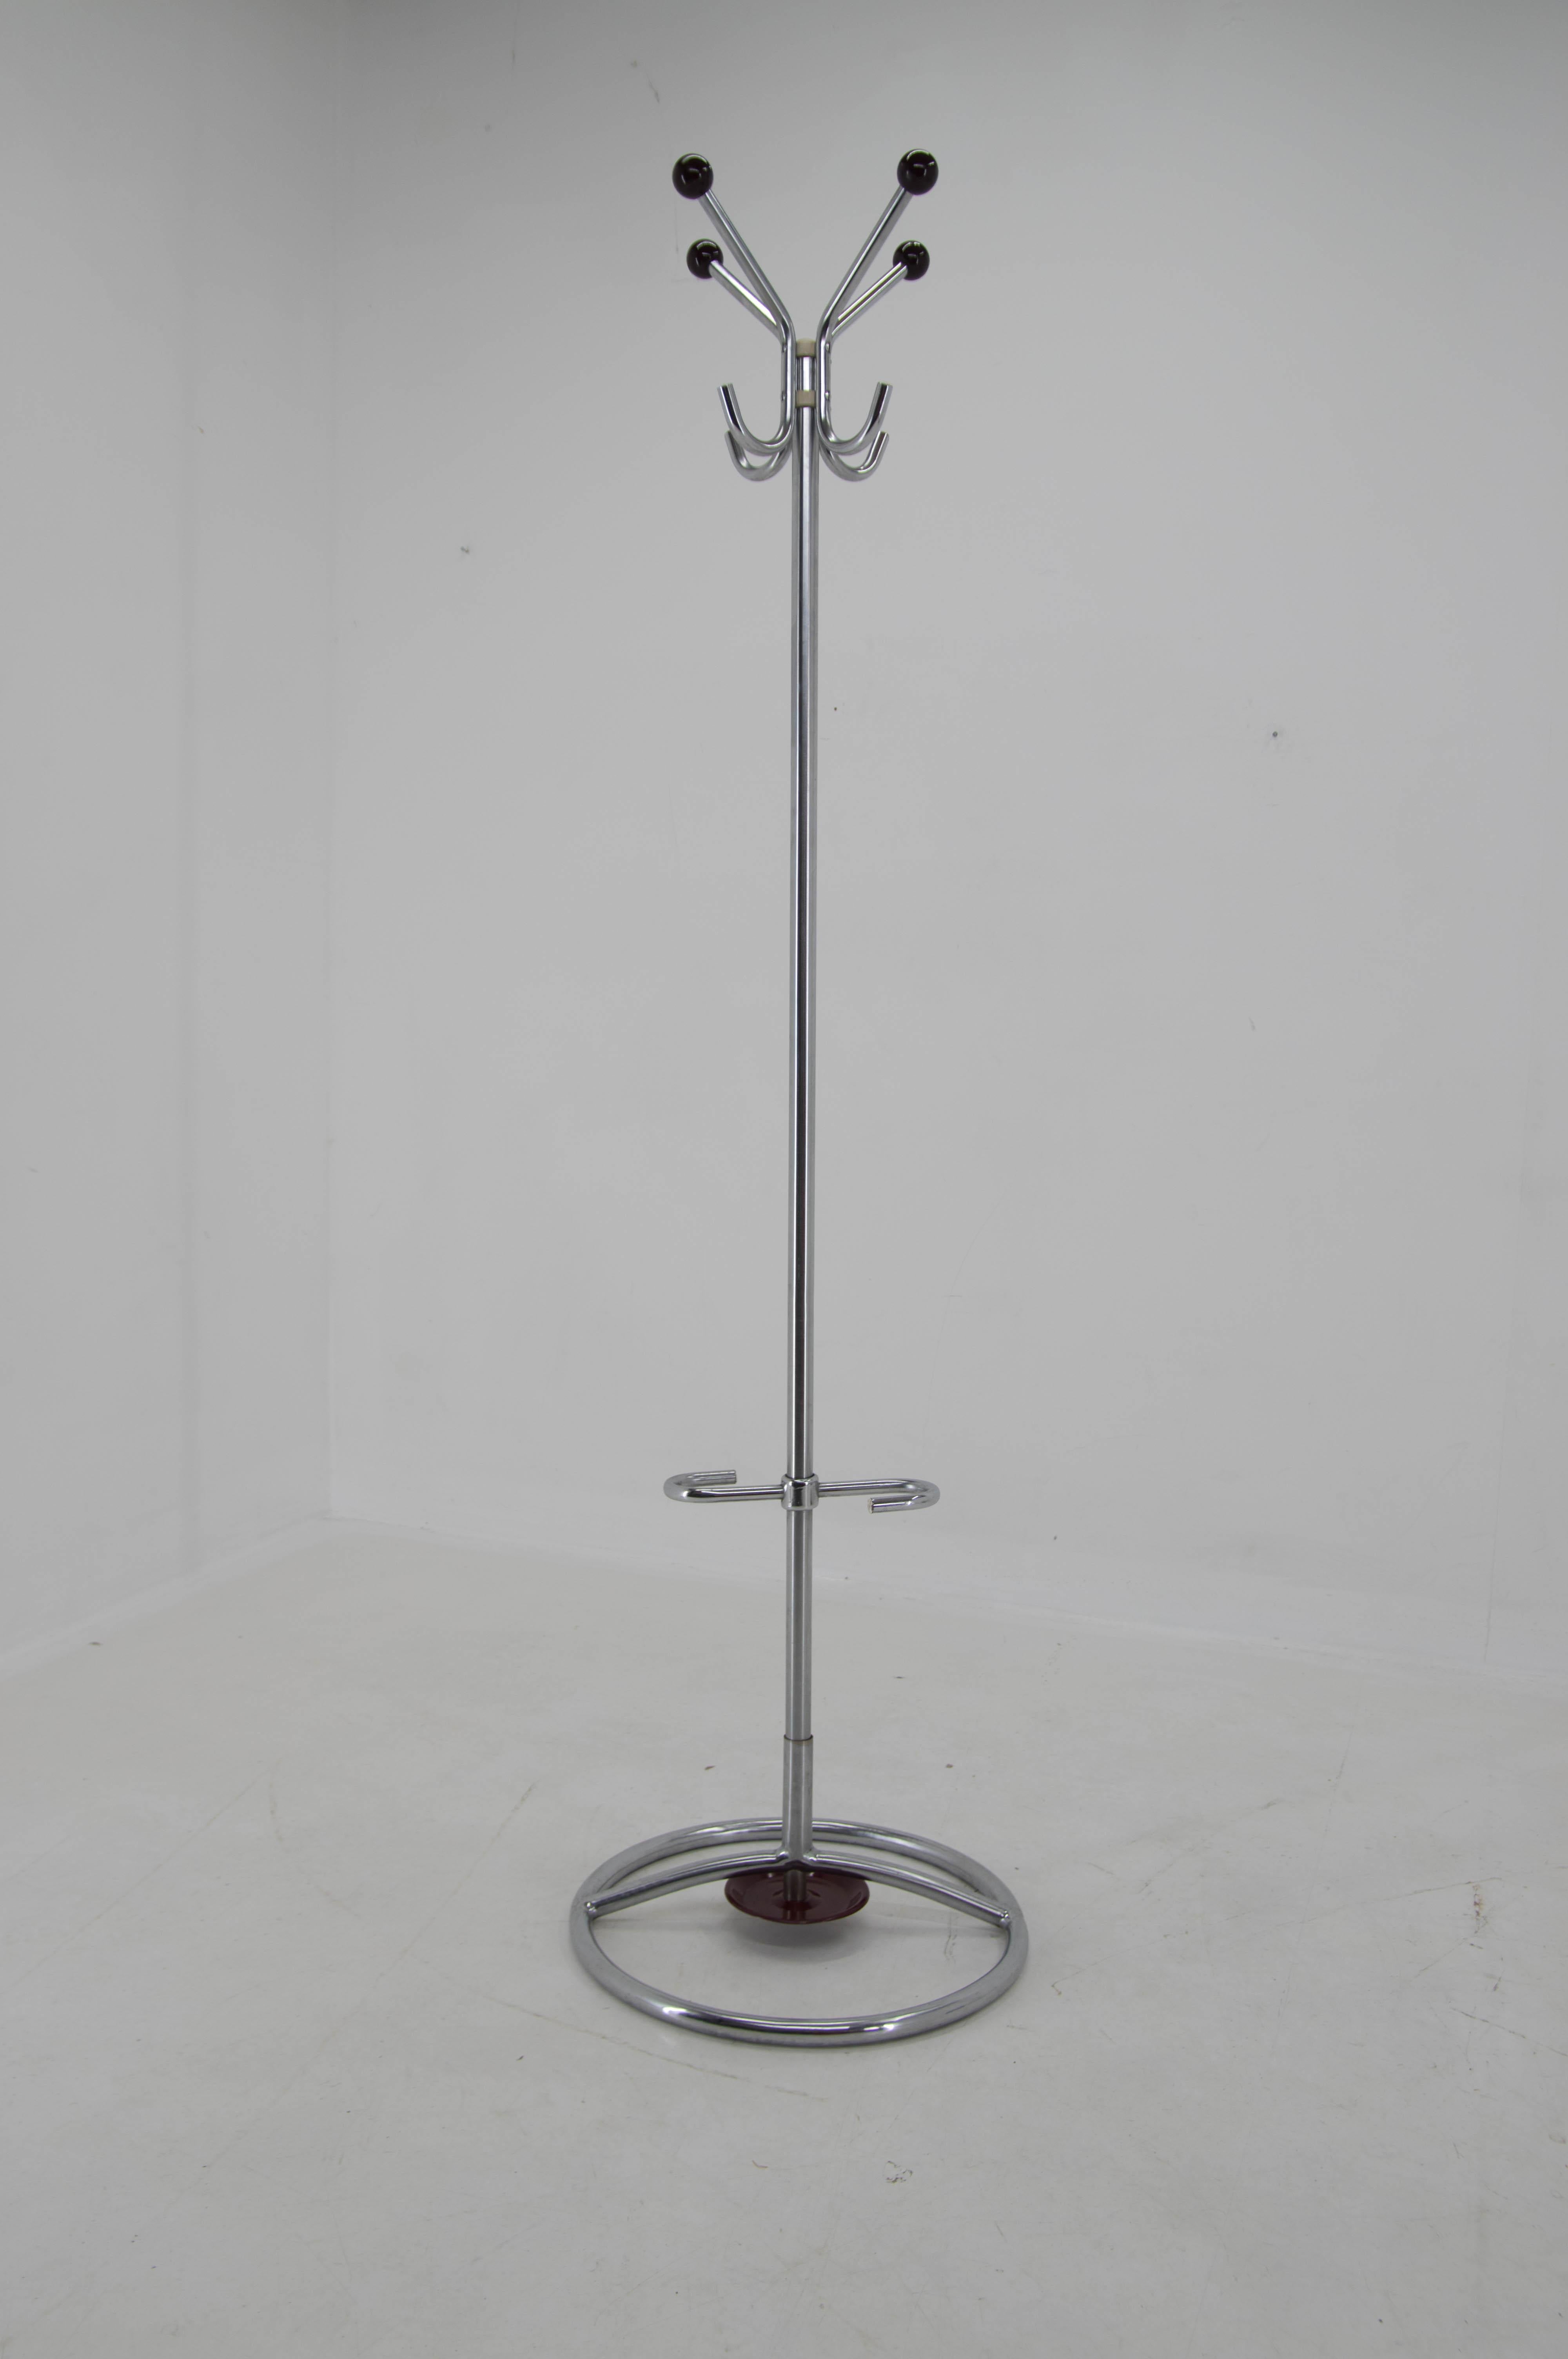 Bauhaus coat rack manufactured by Slezak in Czechoslovakia in 1930s.
Very good original condition with a little age patina. Including umbrella drip tray.